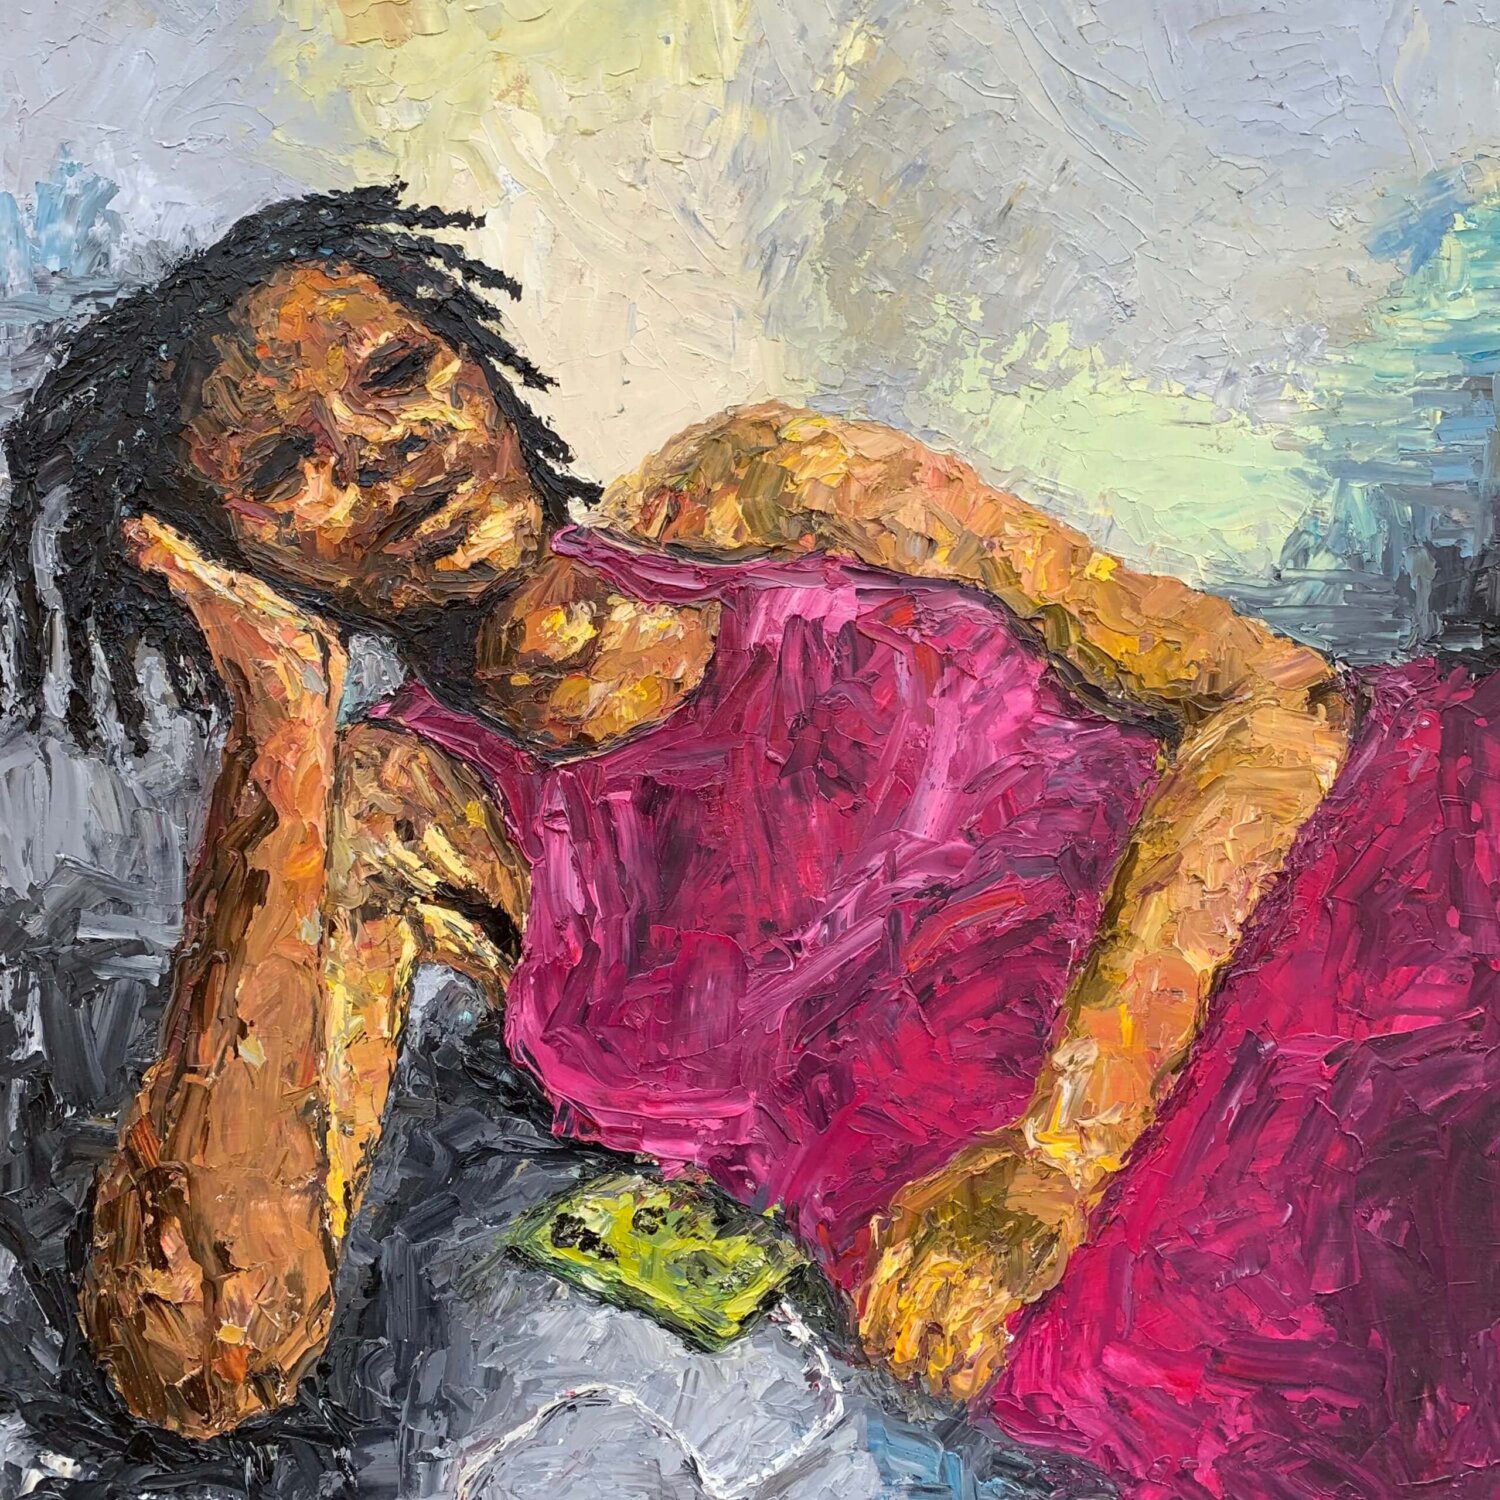 Alone in Thought - Oniosun Victoria - African artwork, African art